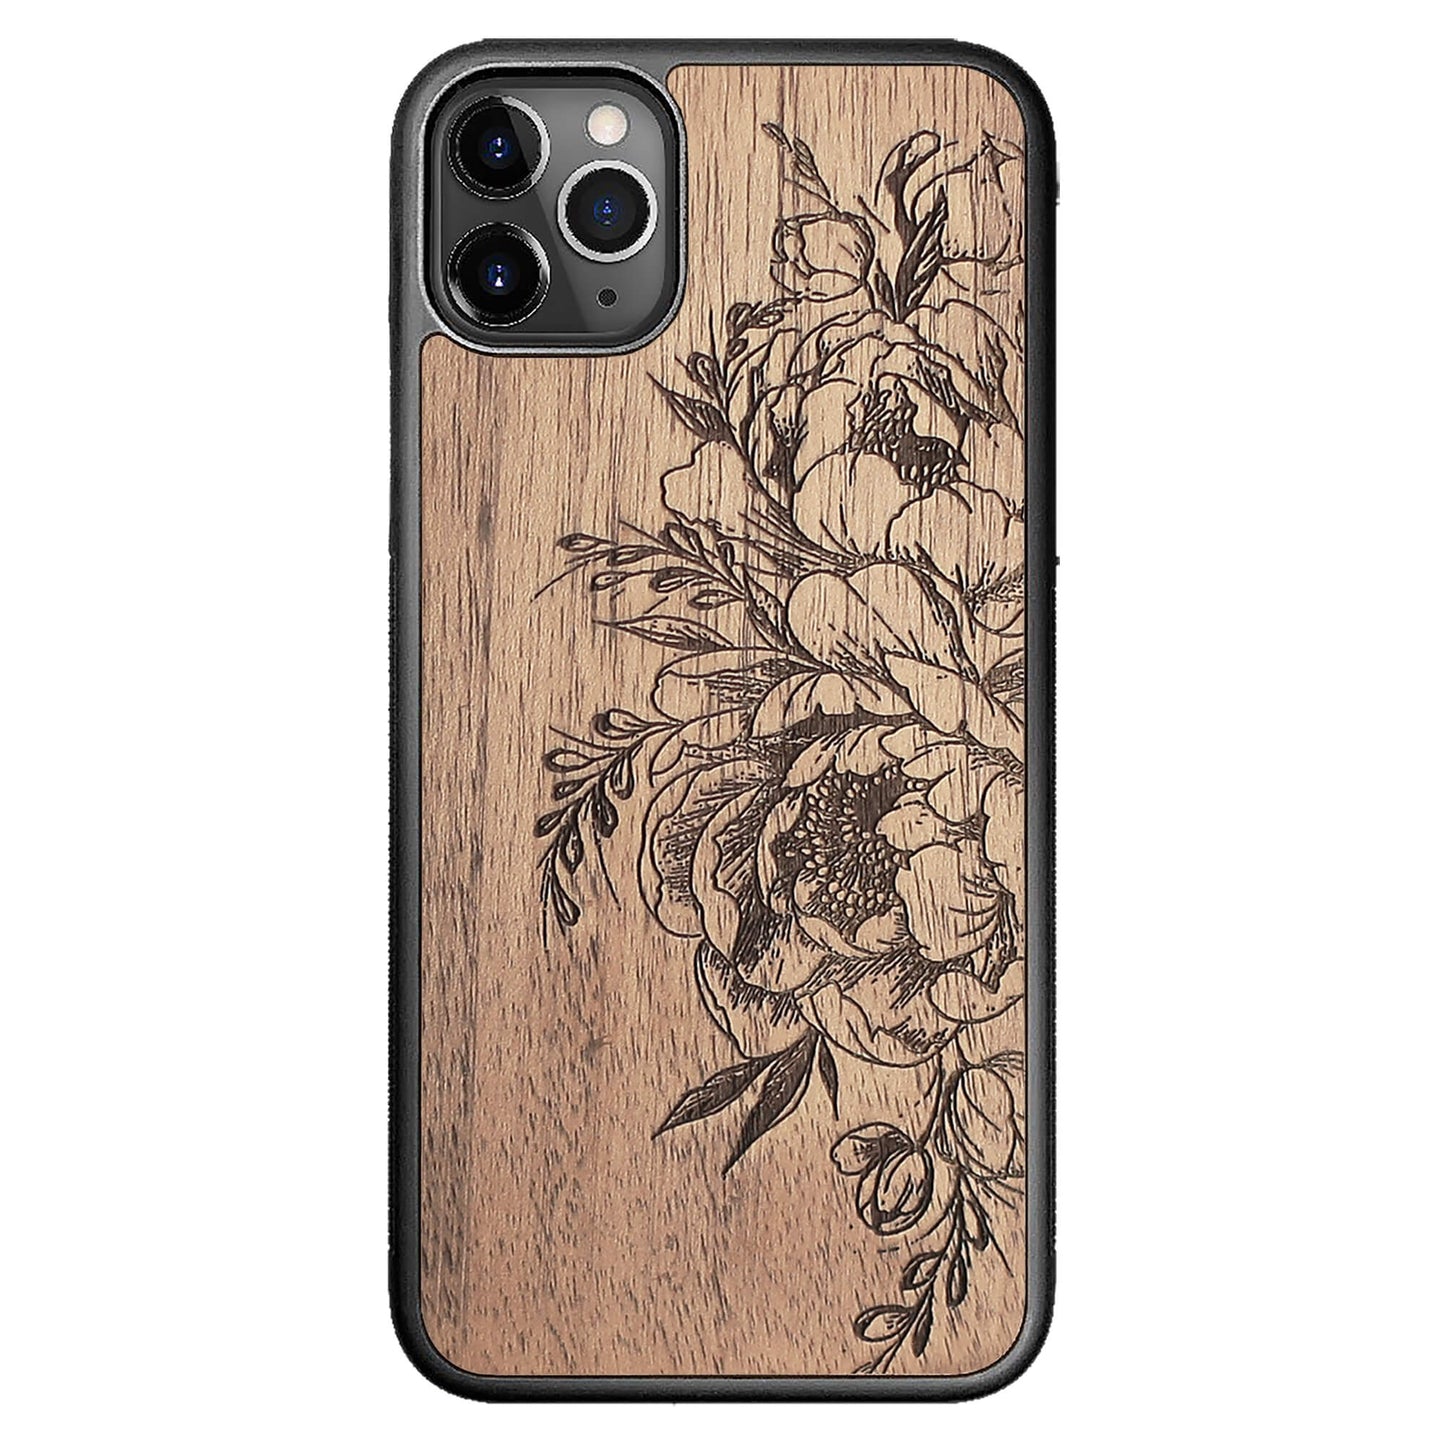 Wooden Case for iPhone 11 Pro Max ﻿Flowers